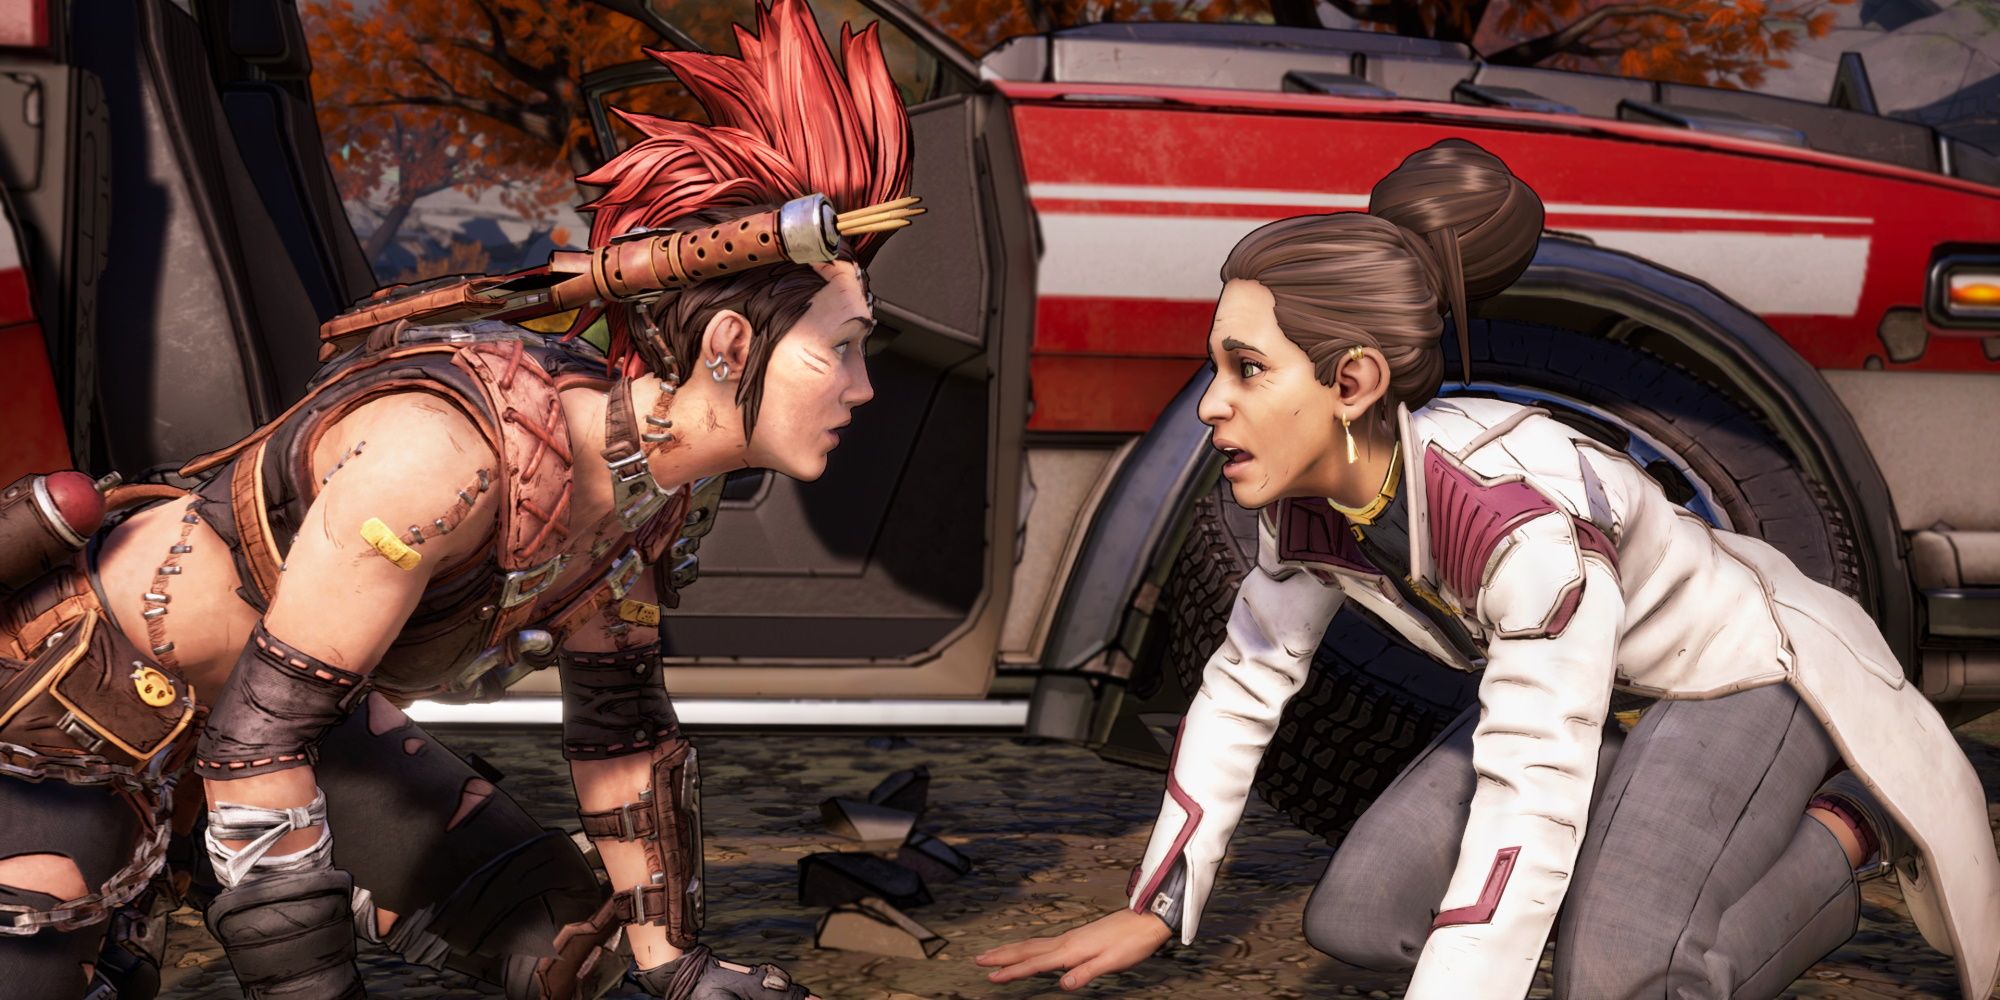 New Tales From The Borderlands